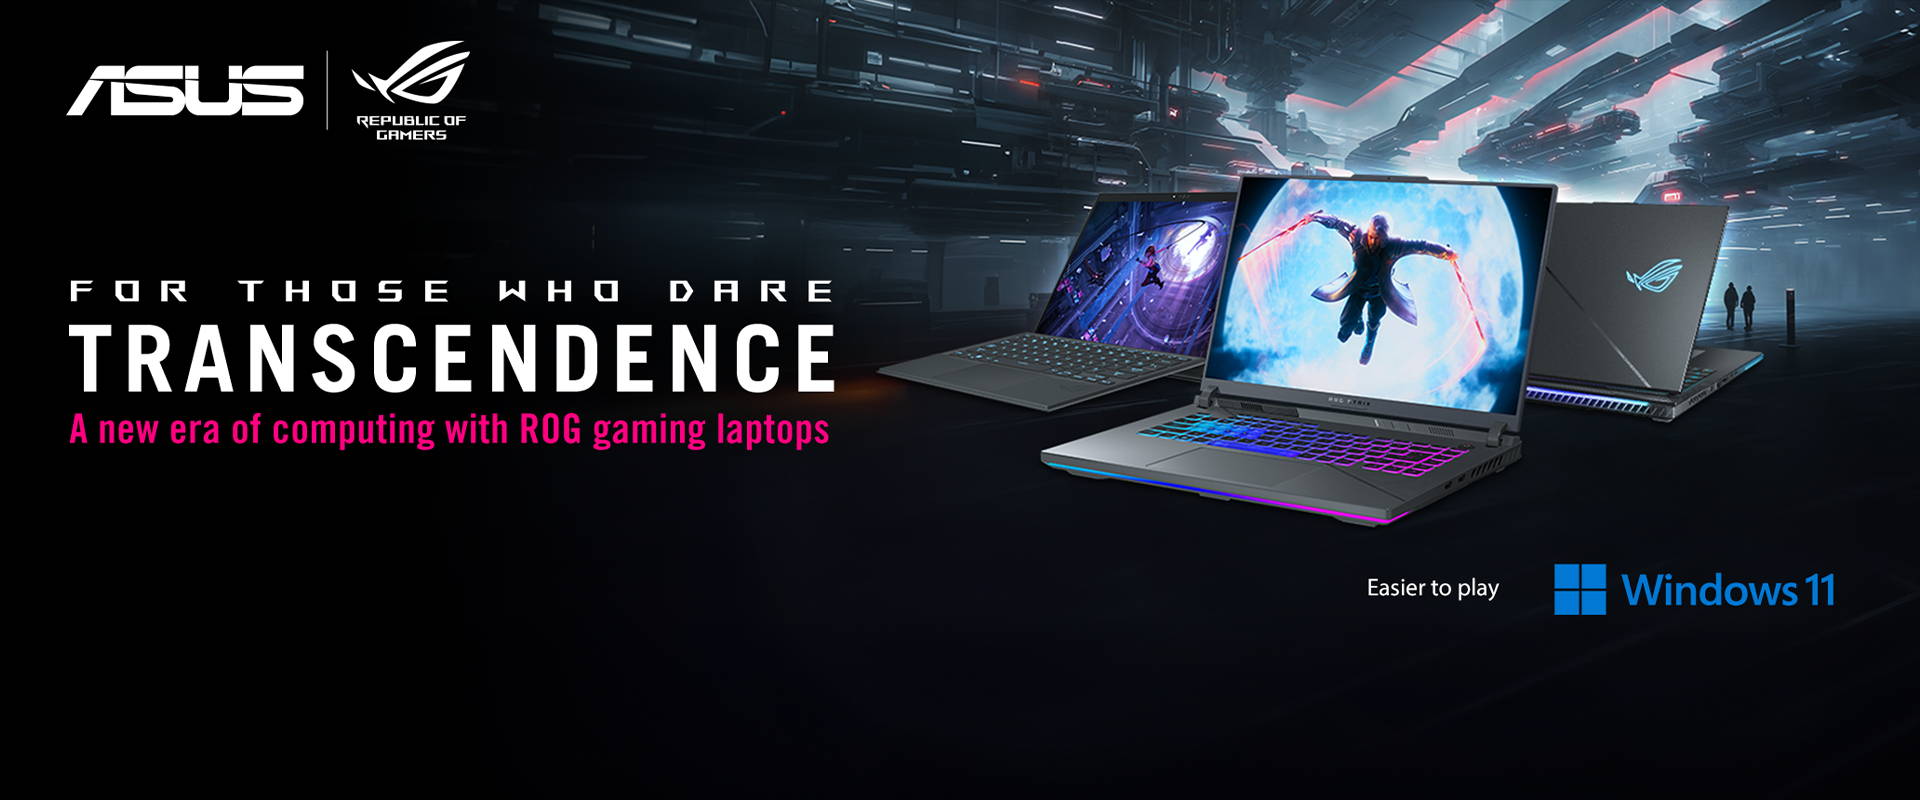 ASUS. For those who dare transcendence. A new era of computing with ROG gaming laptops.